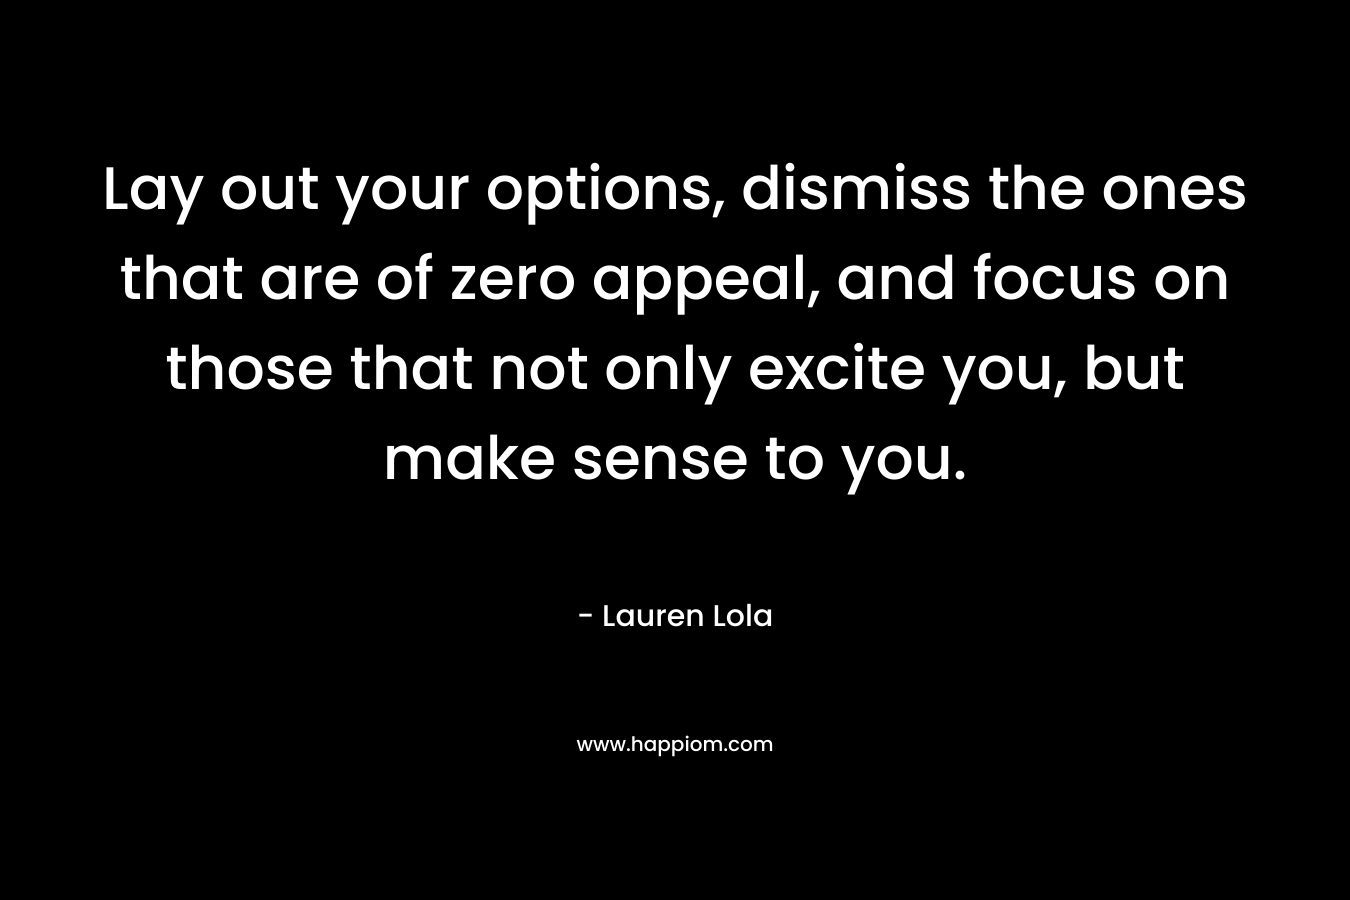 Lay out your options, dismiss the ones that are of zero appeal, and focus on those that not only excite you, but make sense to you. – Lauren Lola